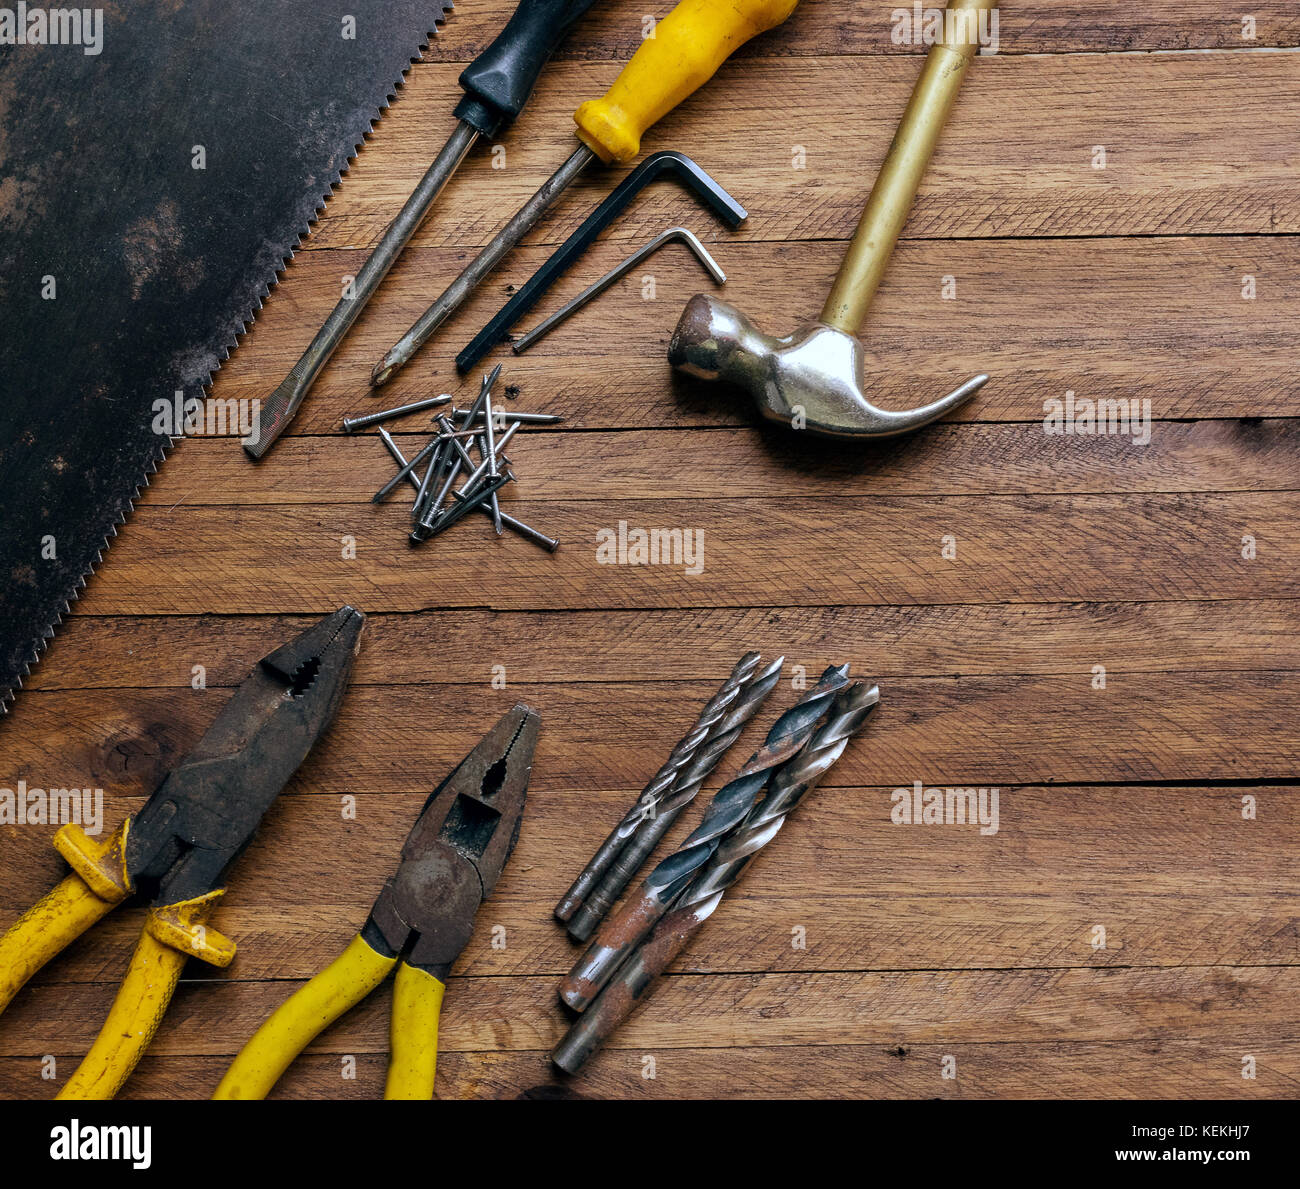 Rusty and old used carpentry and garage tools on a light brown wood background, showing varied tools,with metal pliers and saw,metal drill bits,hammer Stock Photo